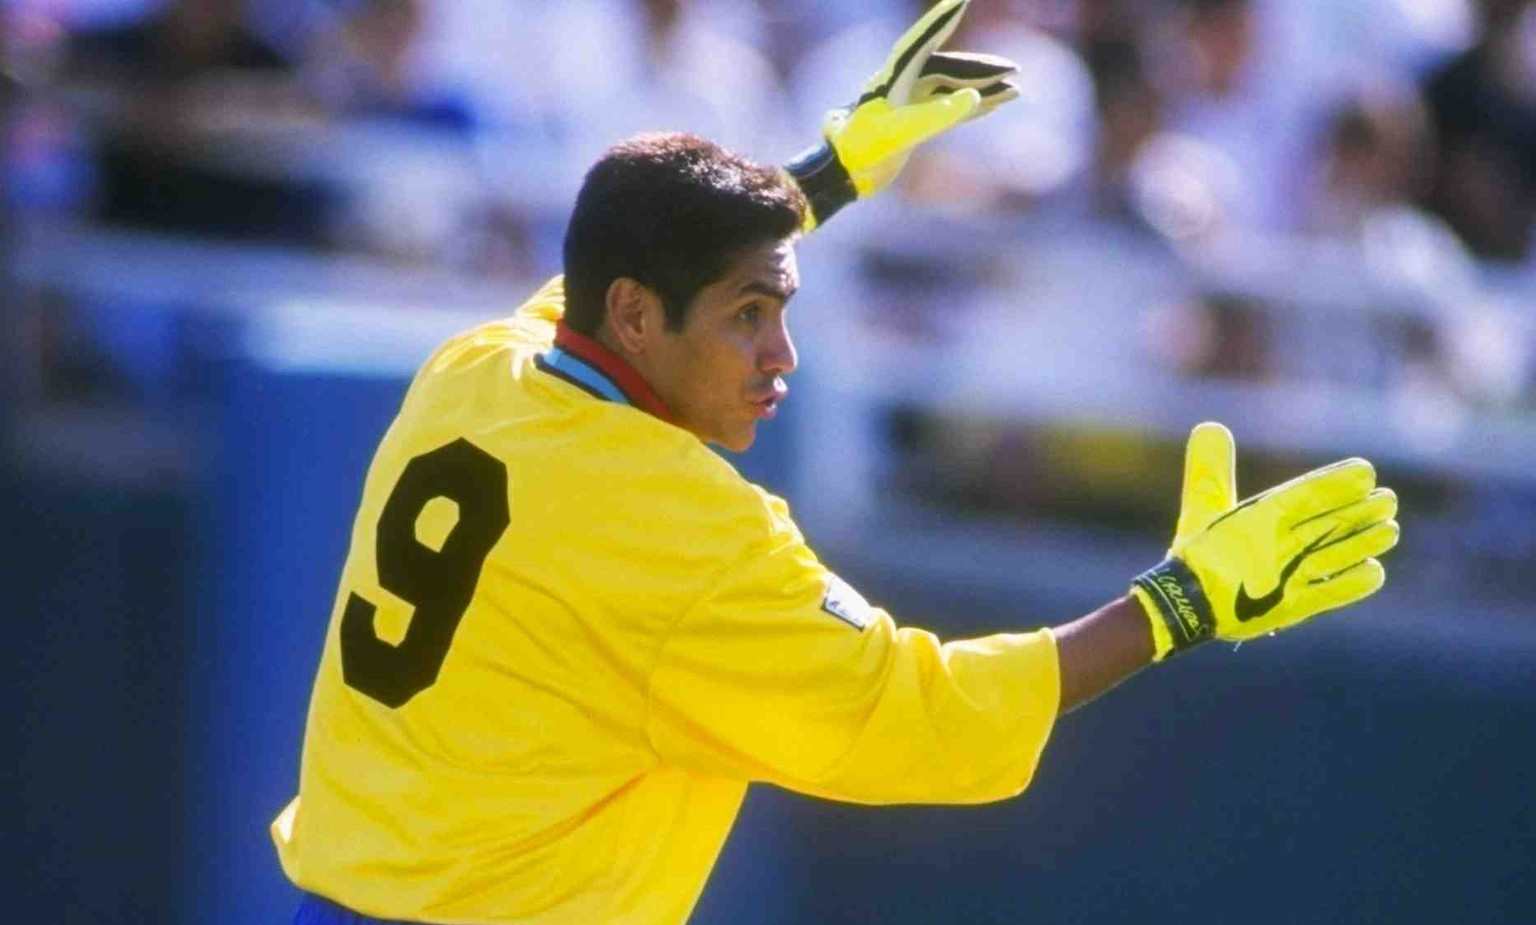 15 Jun 1997: Jorge Campos of the Los Angeles Galaxy in action during a game against the Tampa Bay Mutiny at the Rose Bowl in Pasadena, California. The Galaxy won the game, 4-1.